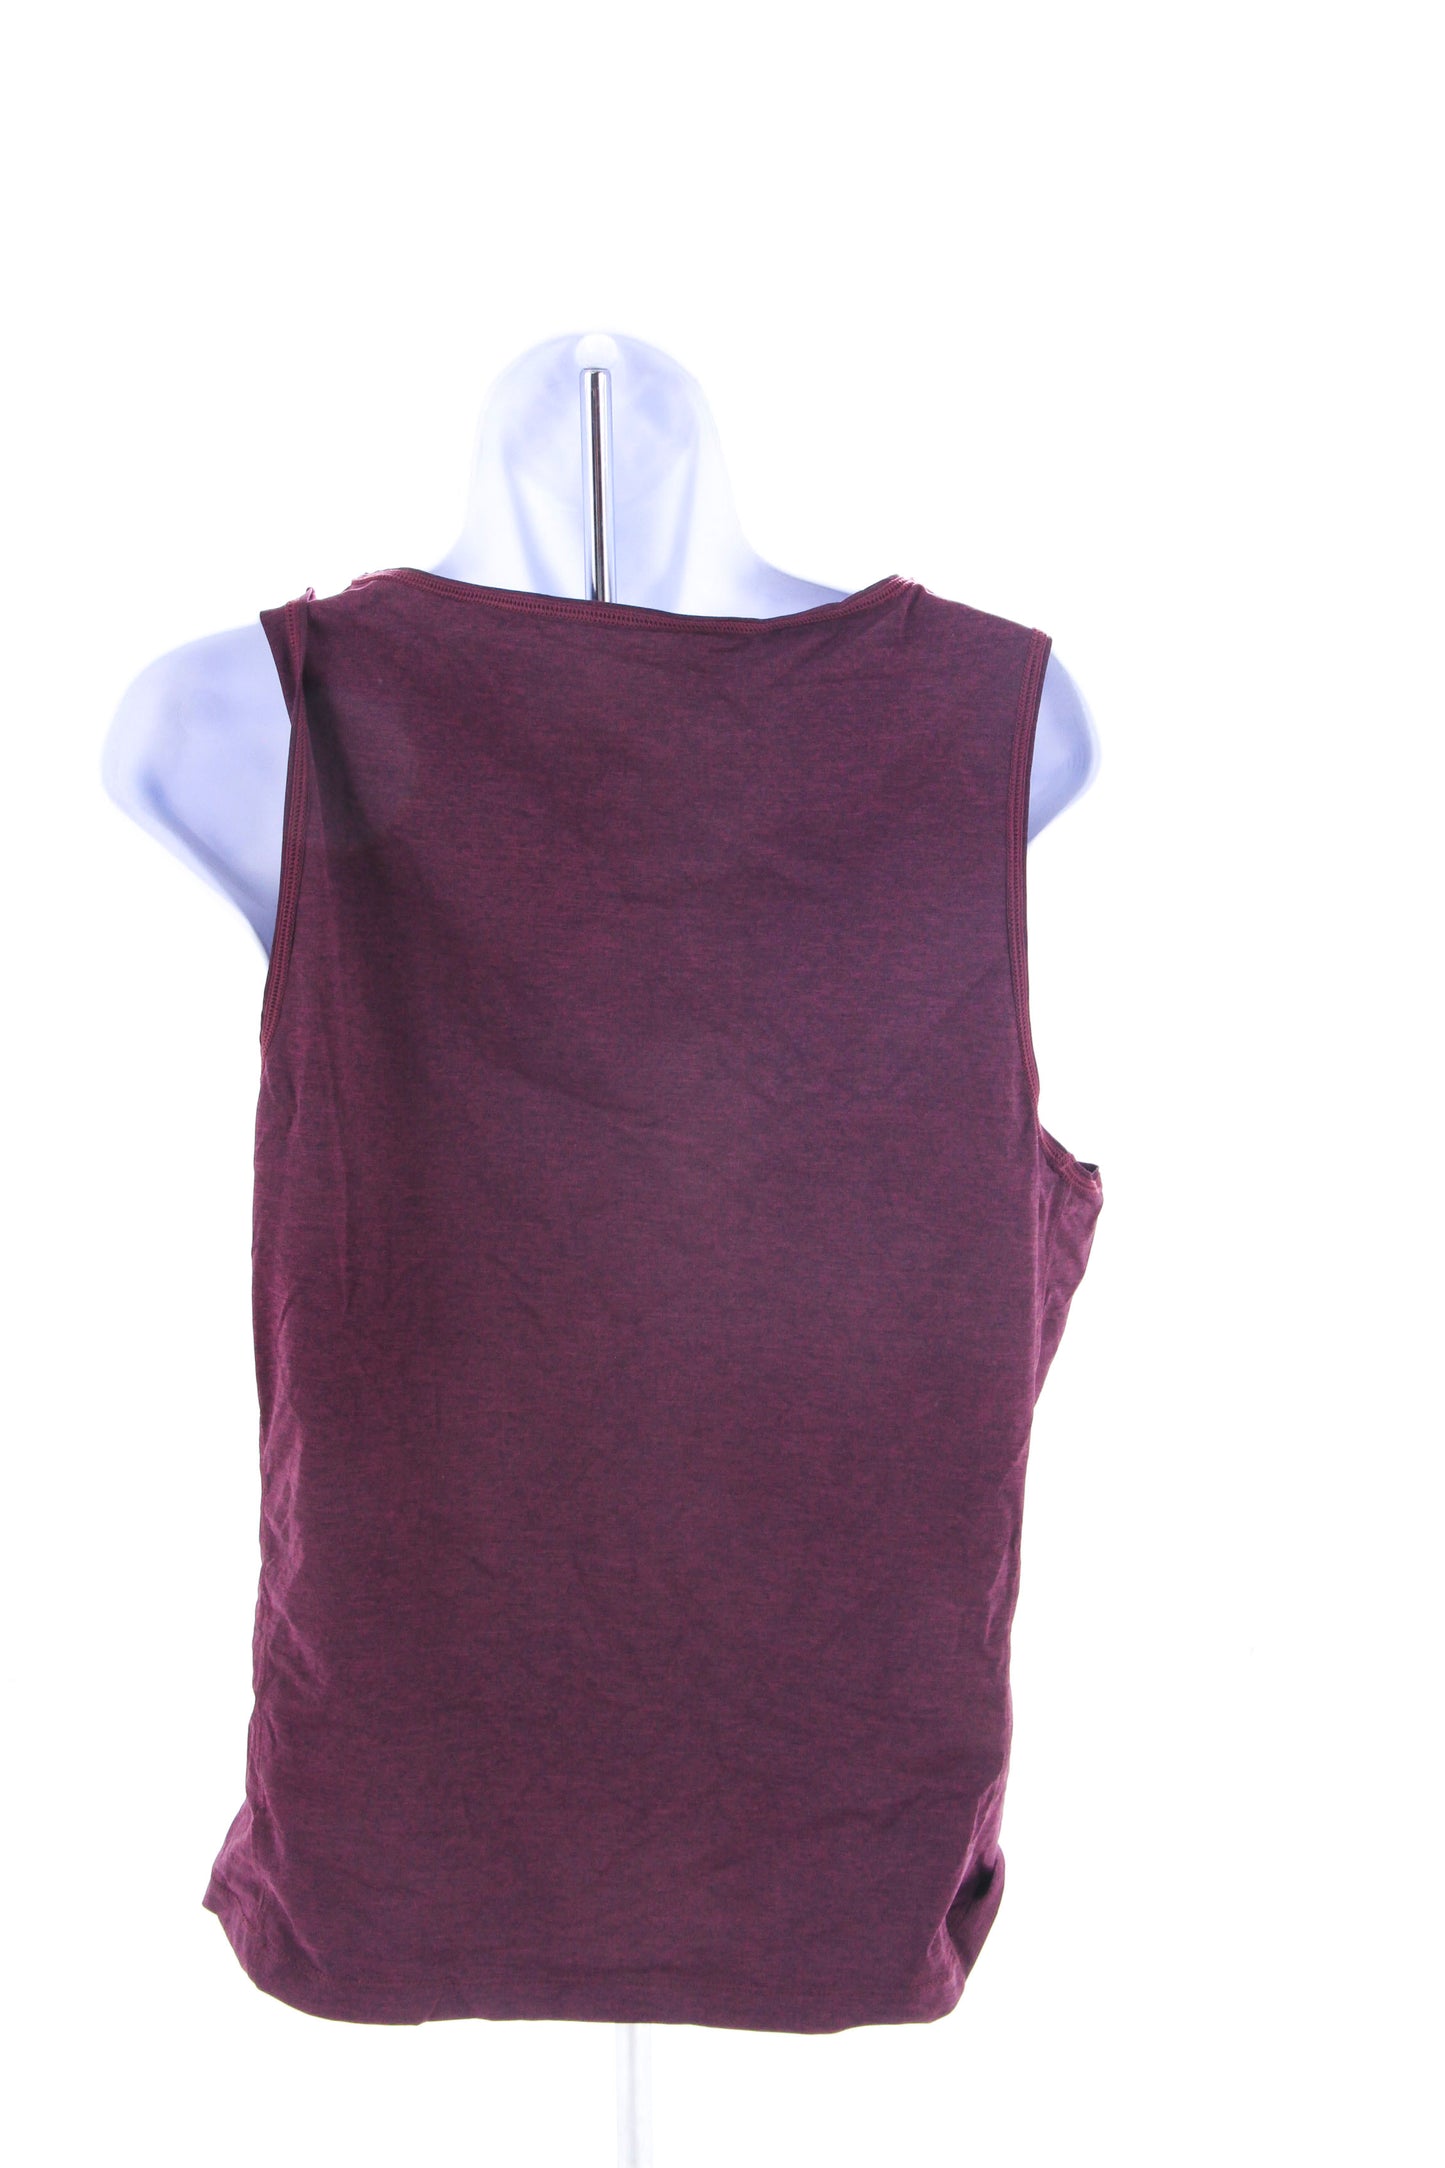 NEW (without tags) Machines for Freedom Luxe Sleeveless Base Layer Women's XL